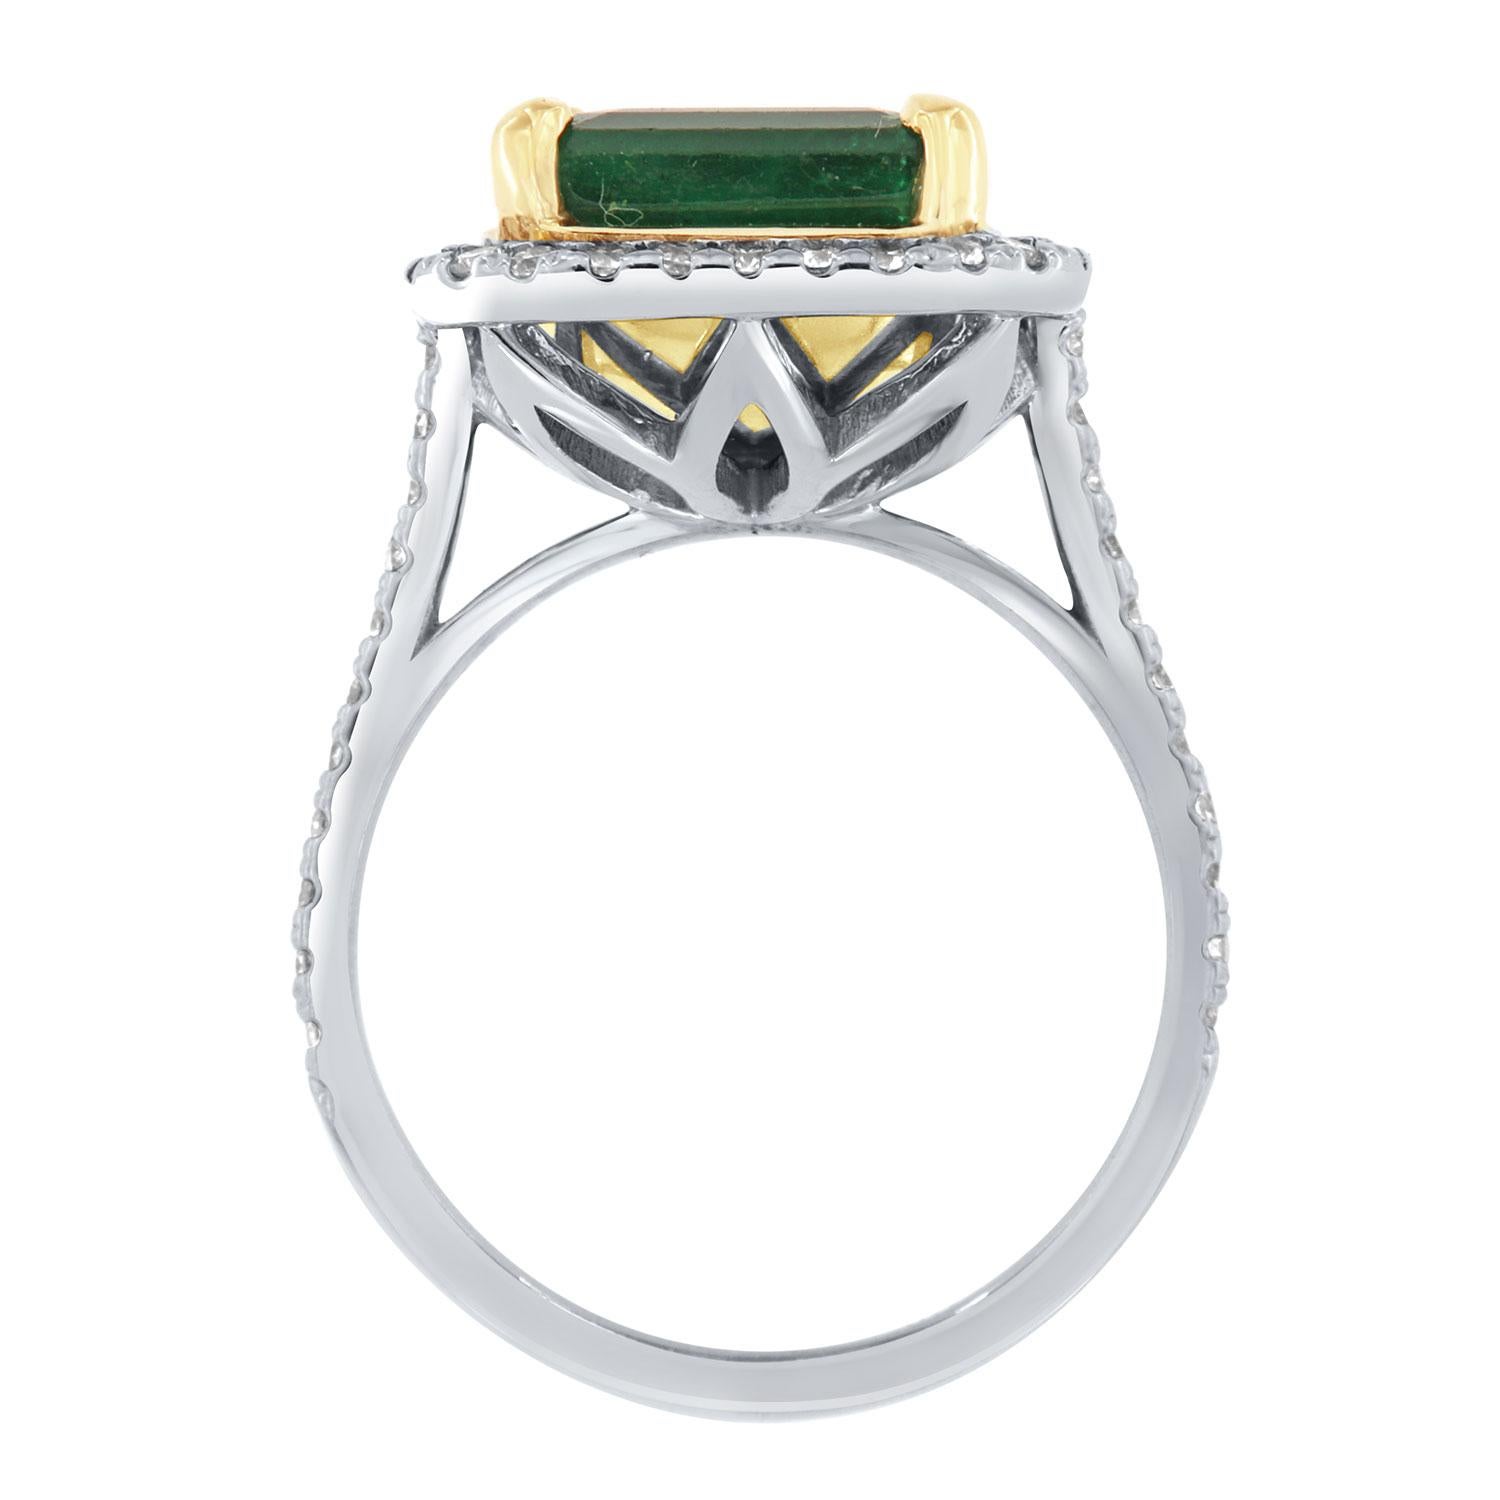 14K White Gold 4.52 Carat Green Emerald Halo Diamond Ring In New Condition For Sale In San Francisco, CA